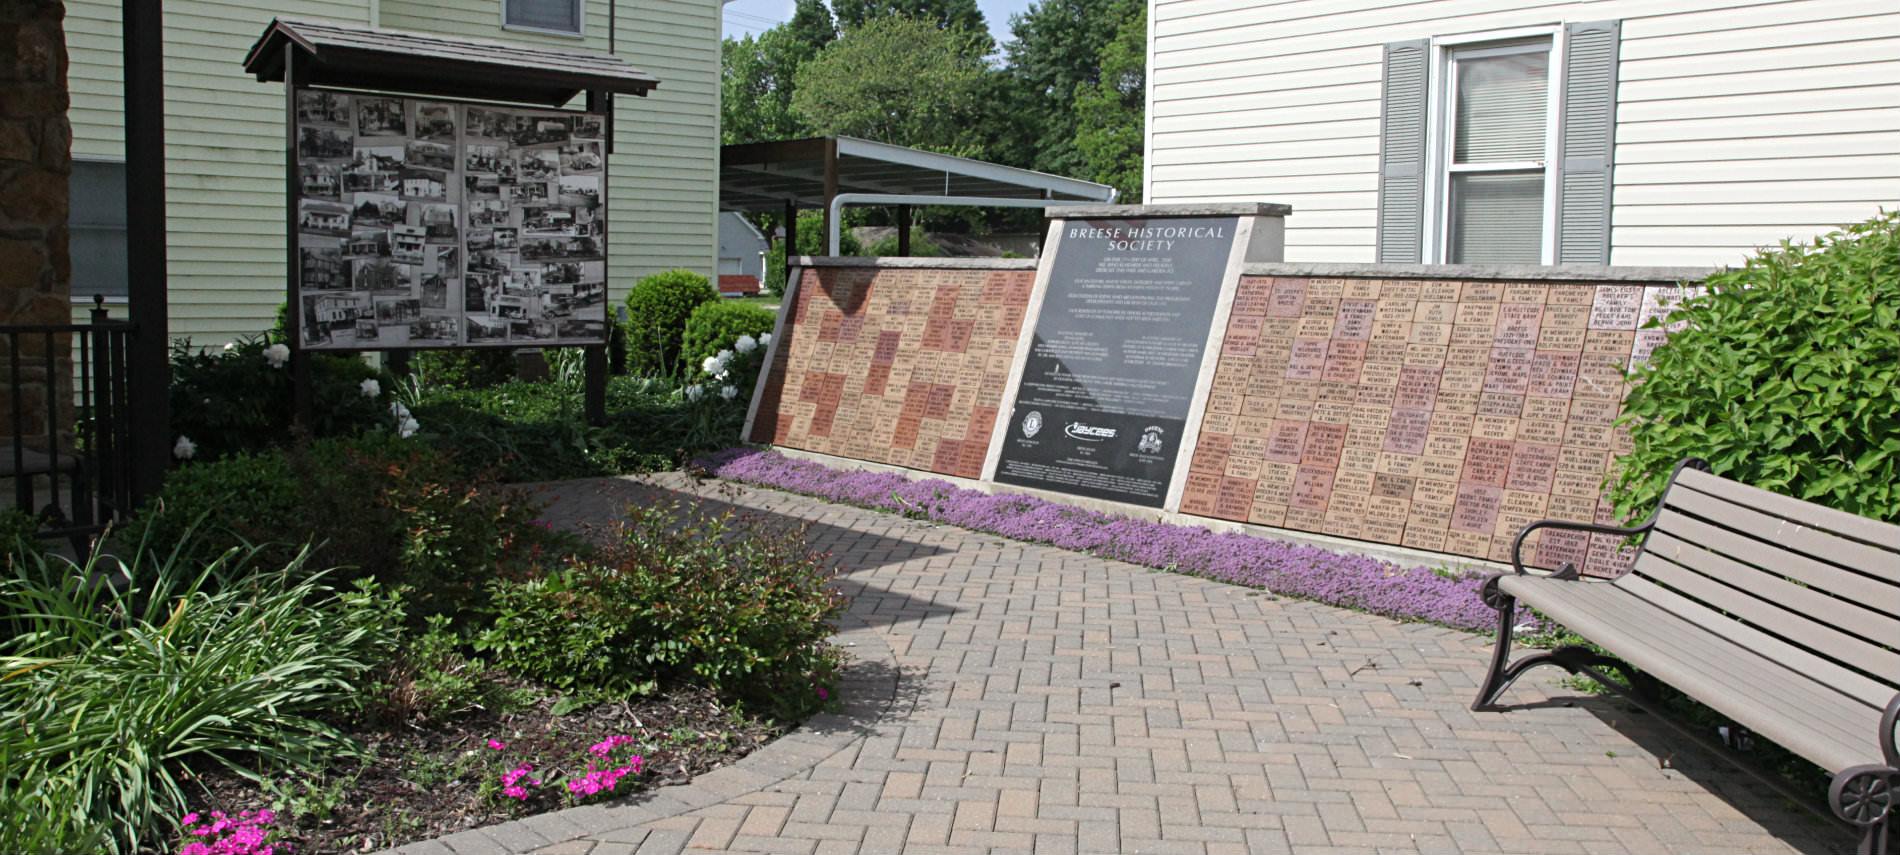 Patterned walkway made out of bricks leading to bulletine board with collage of pictures and on right Breeze Historical Society memorial wall.